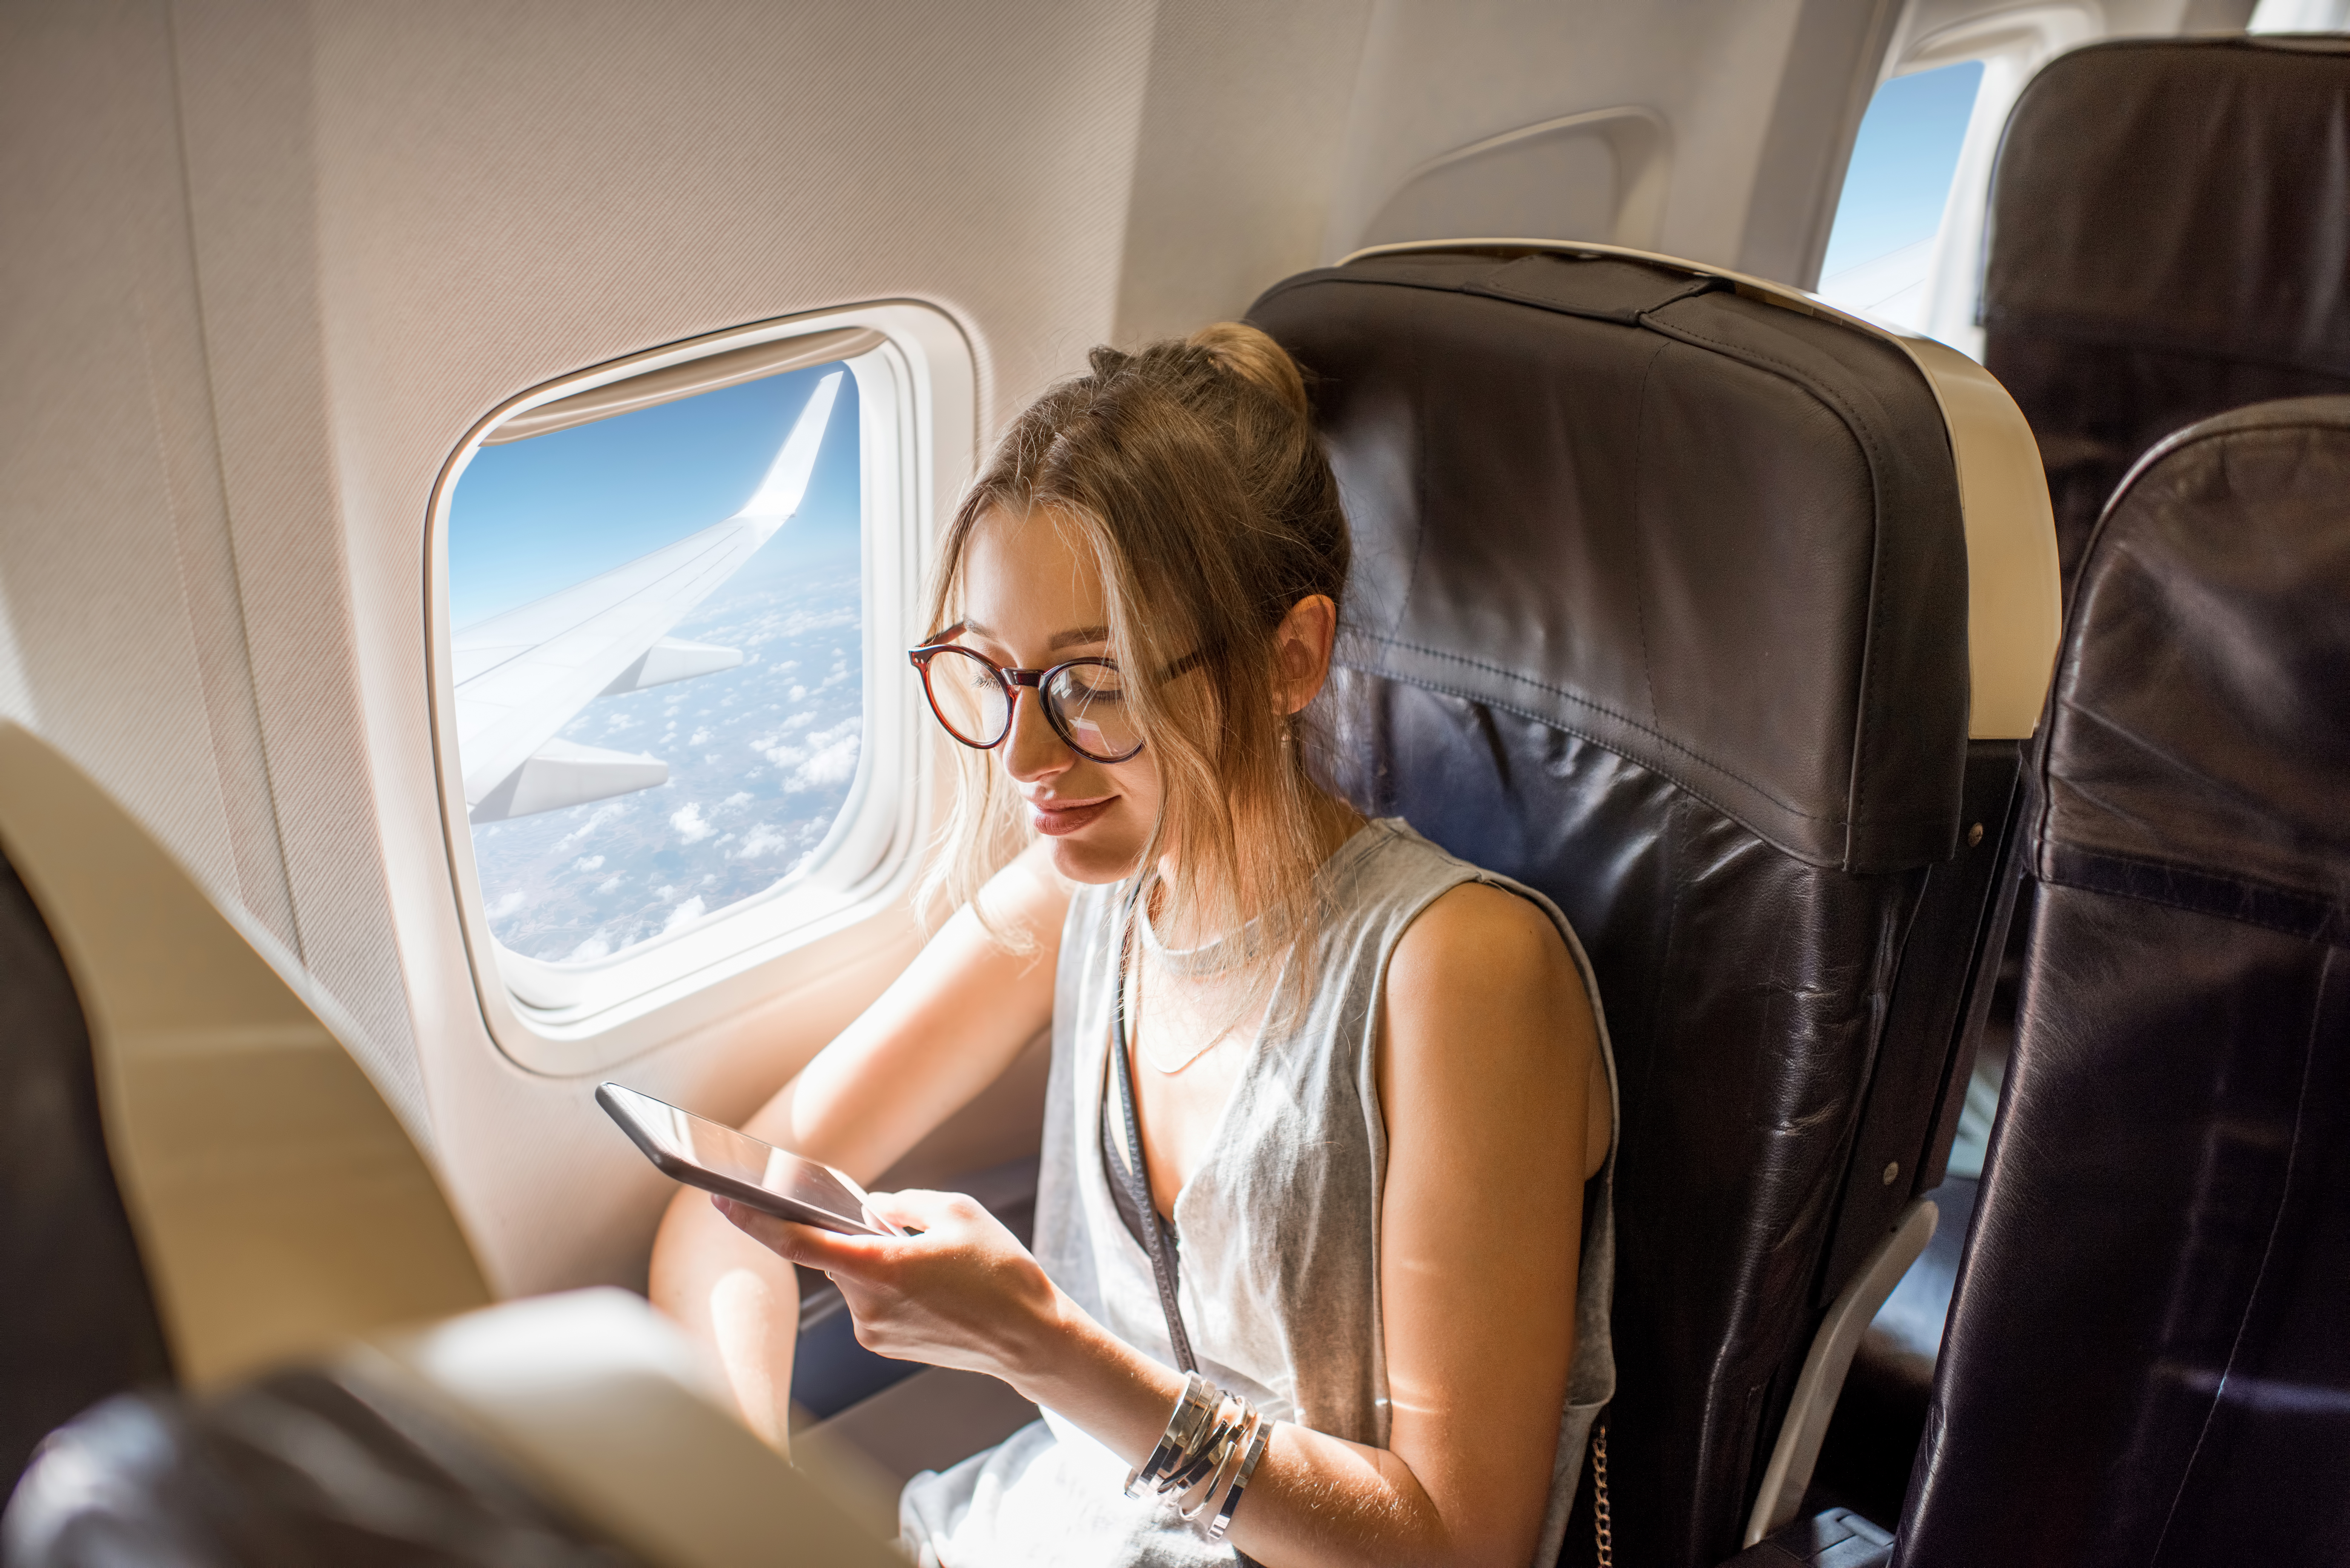 A woman in an airplane | Source: Shutterstock